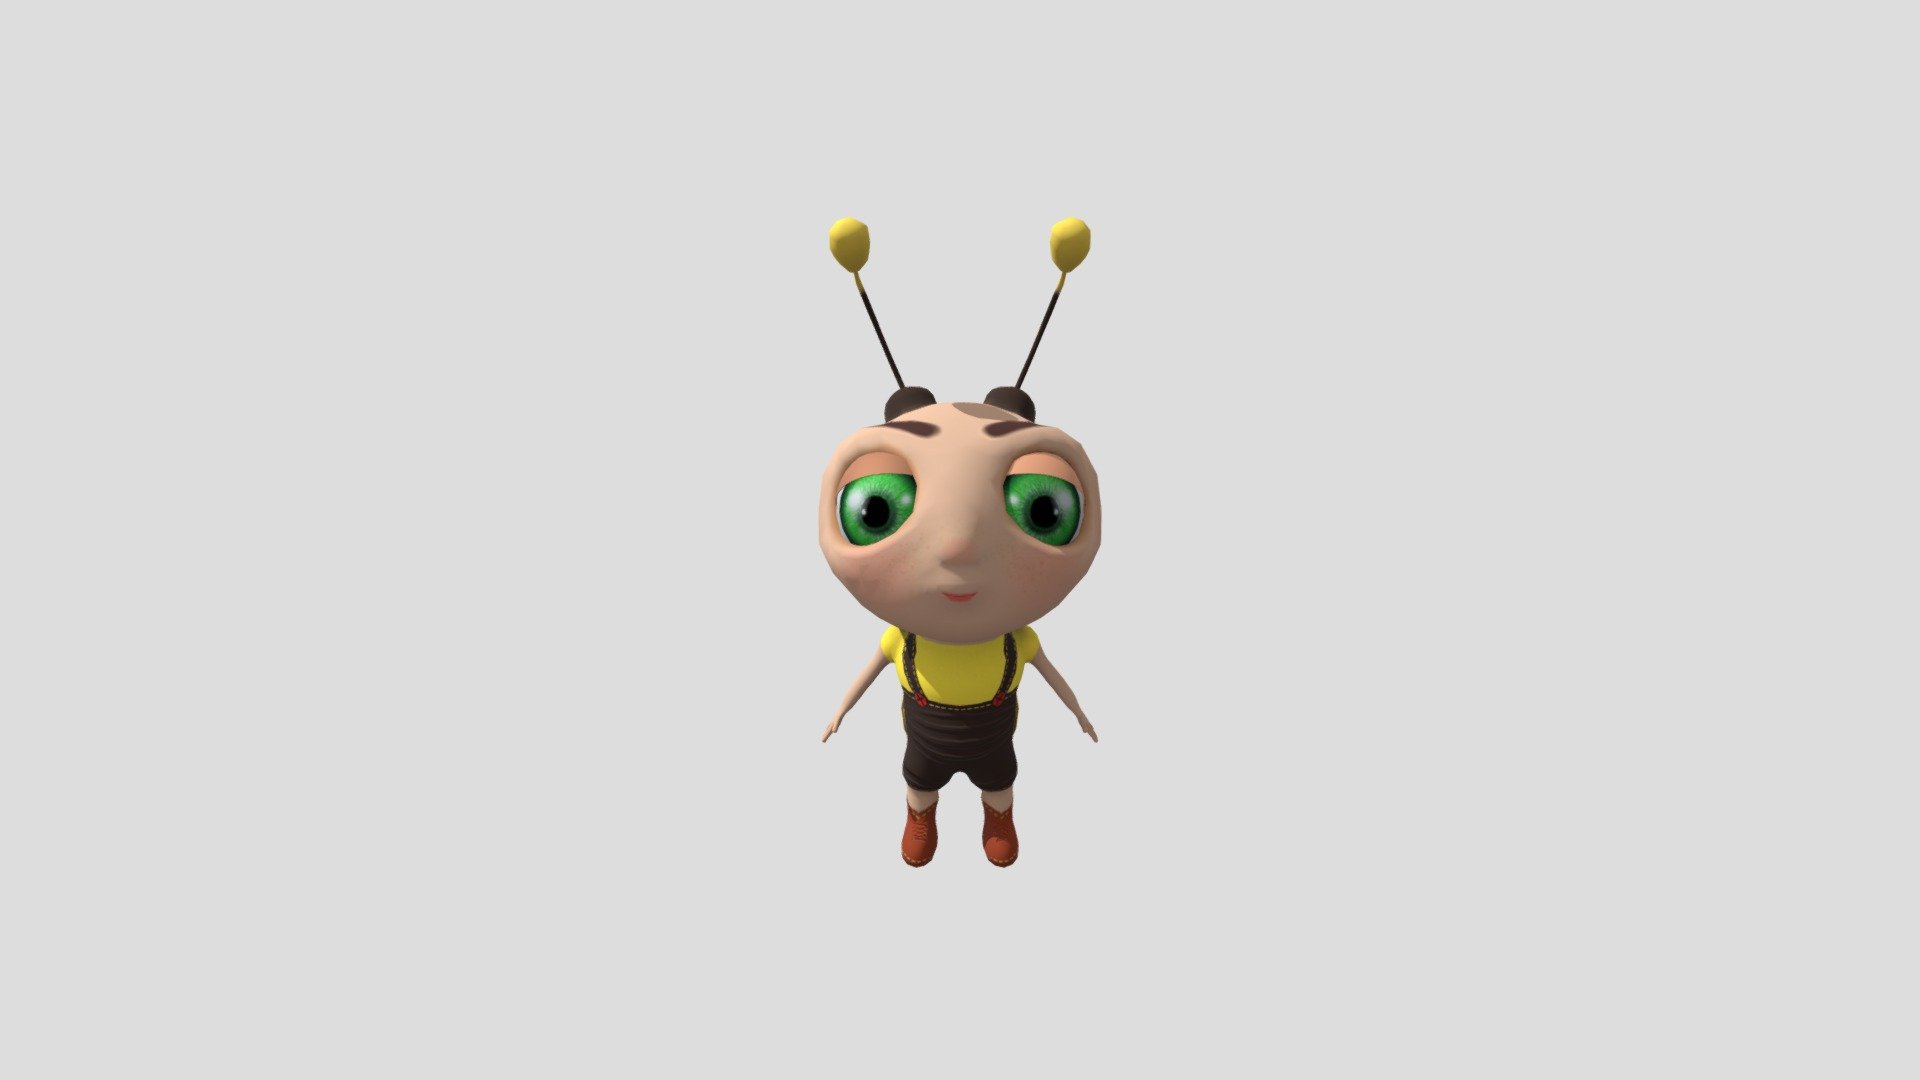 The cute bee is a lowpoly 3d model that is perfect for any game.
The bee is highly detailed and has a very professional look to it. With its cute face and big eyes, the bee is sure to be a hit with any gamer.

Looking for an adorable 3d model to use in your next game? Look no further than the lowpoly 3d model bee! This little bee is sure to add some buzz to your game with its cute looks and impressive animations. The lowpoly 3d model bee comes fully rigged and textured, ready to be used in your Unity or Unreal Engine project. So why wait? Add this little cutie to your game today!

3 prefabs of 3 color variations included

1x Roughness Map

1x Normal Map

1x AO Map

3x Albedo Map

Textures Sizes: 2048 x 2048 - Rigged Stylized Cartoon Bee Character - Buy Royalty Free 3D model by HayqArt 3d model